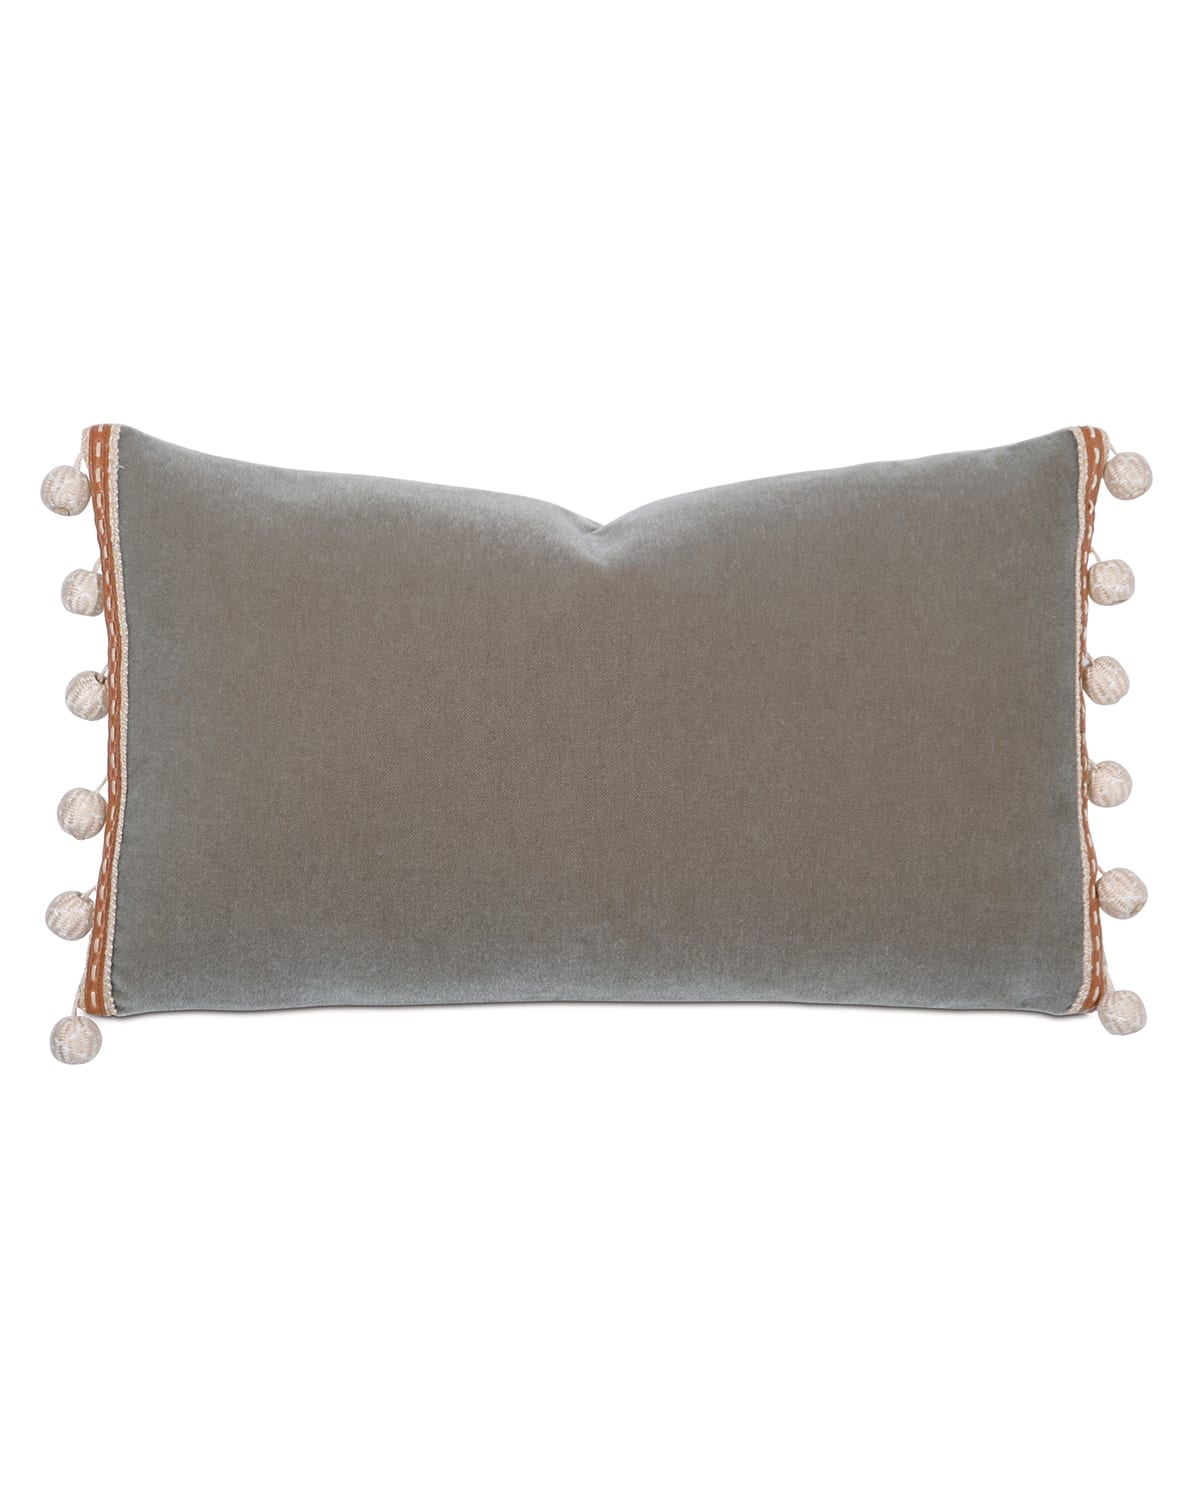 Image Eastern Accents Canyon Clay Decorative Pillow w/ Pompom Tassels